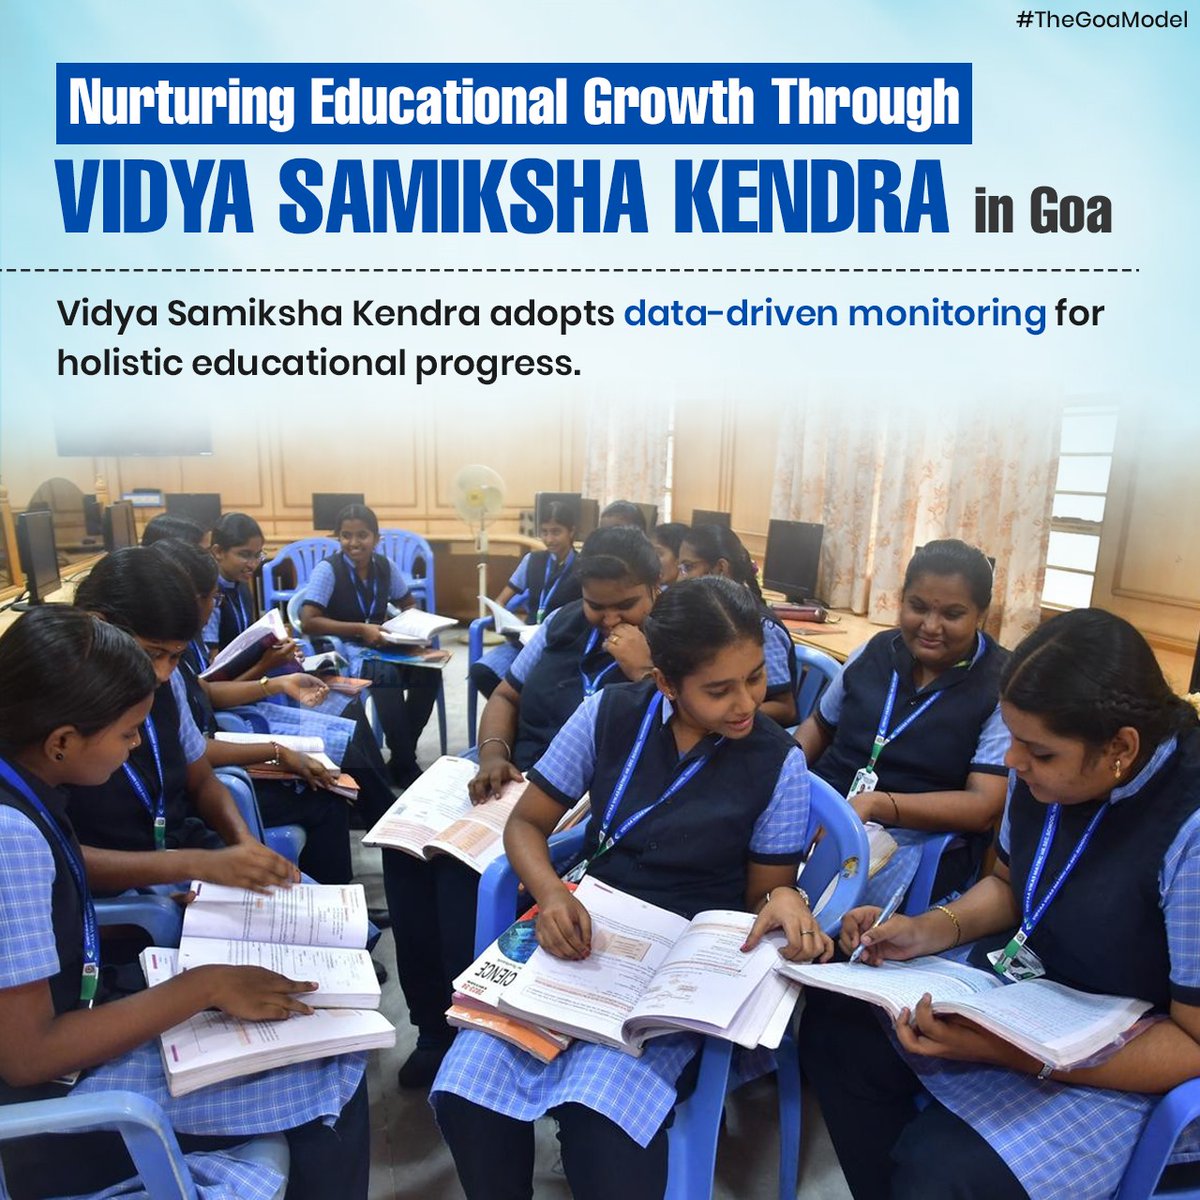 Vidya Samiksha Kendra in Goa leads the way in driving educational excellence through data-driven monitoring, fostering a culture of ongoing development and growth in education. #EducationalExcellence #GoaEducation #TheGoaModel